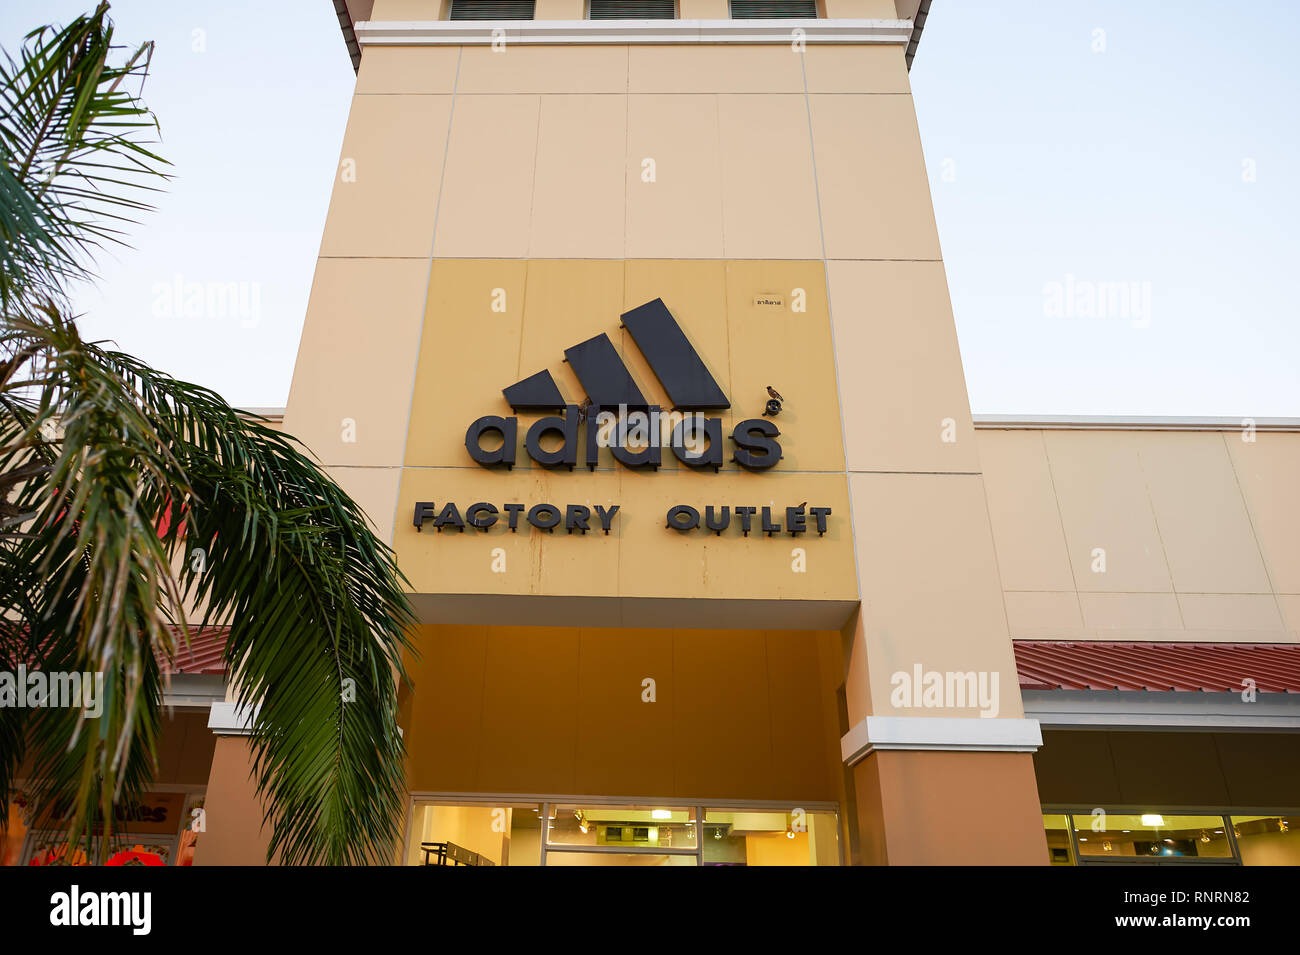 PATTAYA, THAILAND - FEBRUARY 21, 2016: Adidas outlet in Pattaya. Adidas AG is a German multinational corporation that designs and manufactures sports Photo -